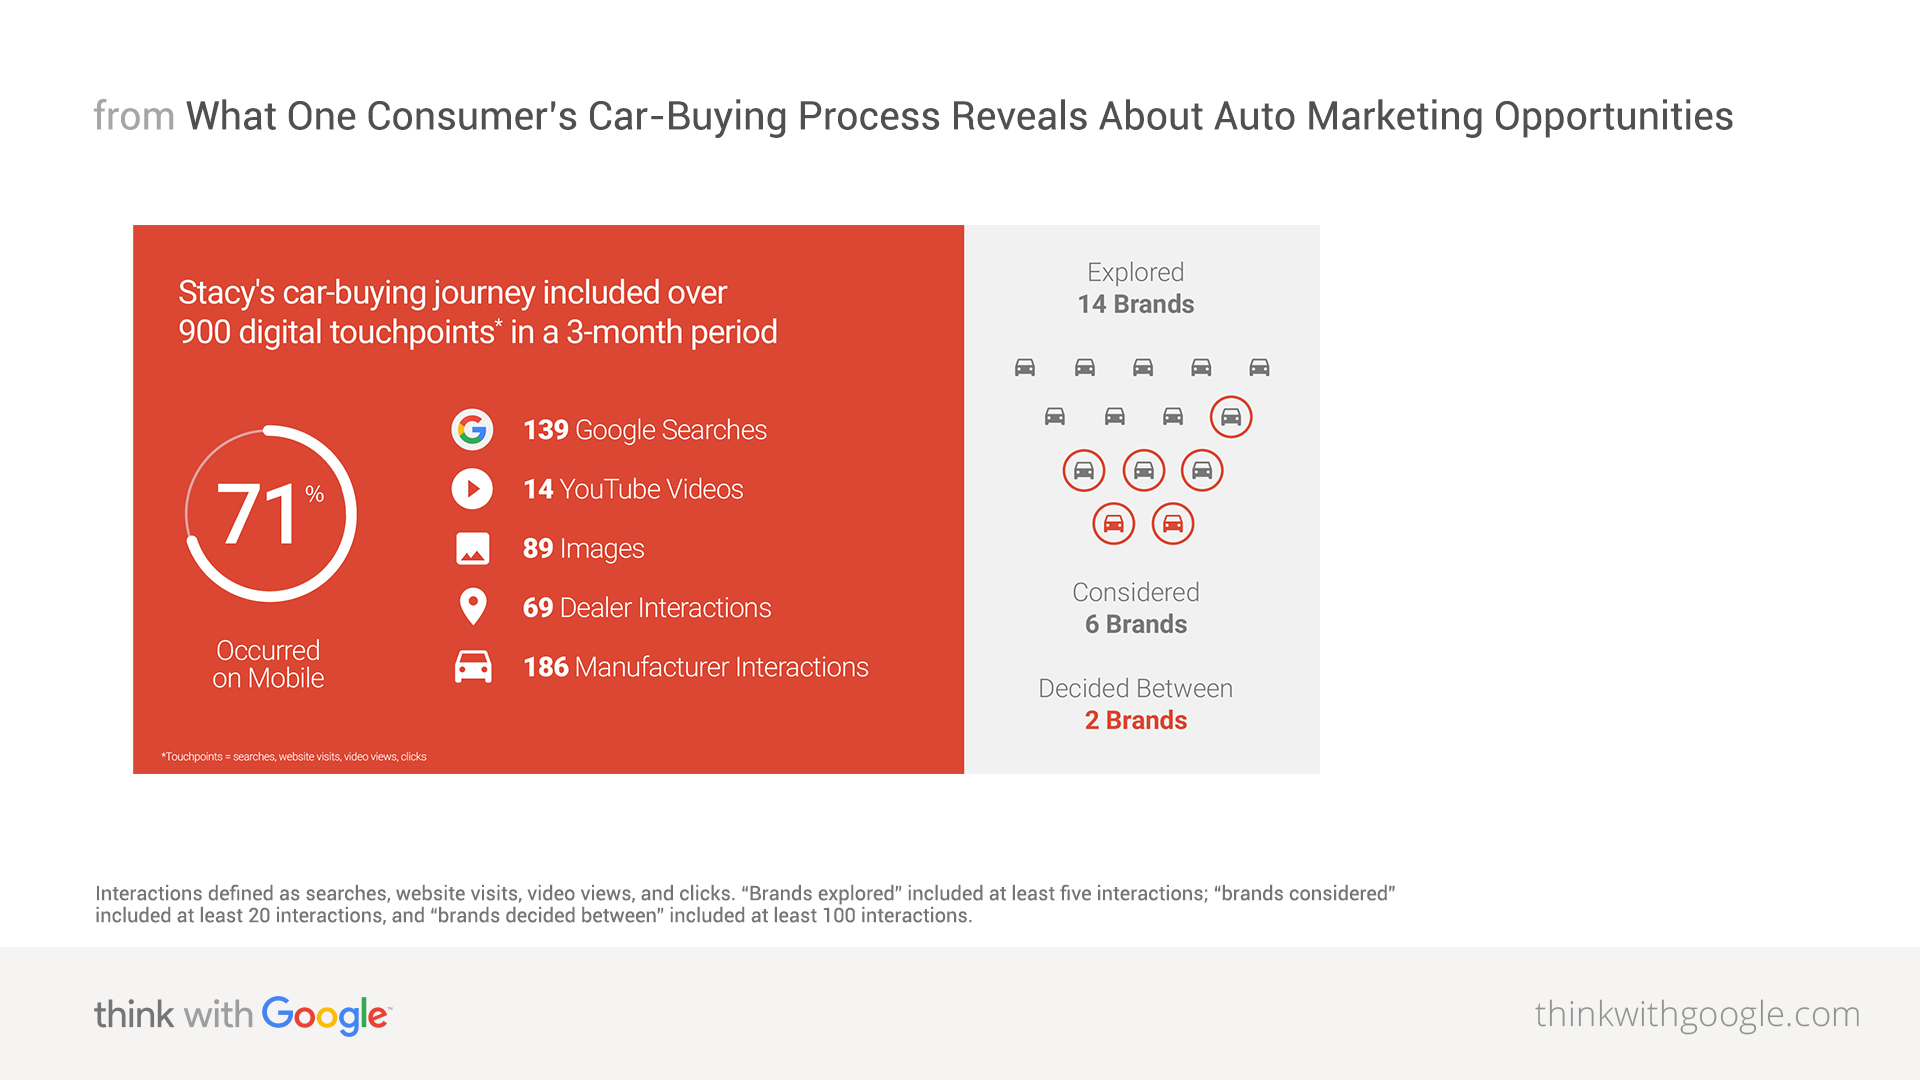 The path to purchase in the car-buying process - Think with Google